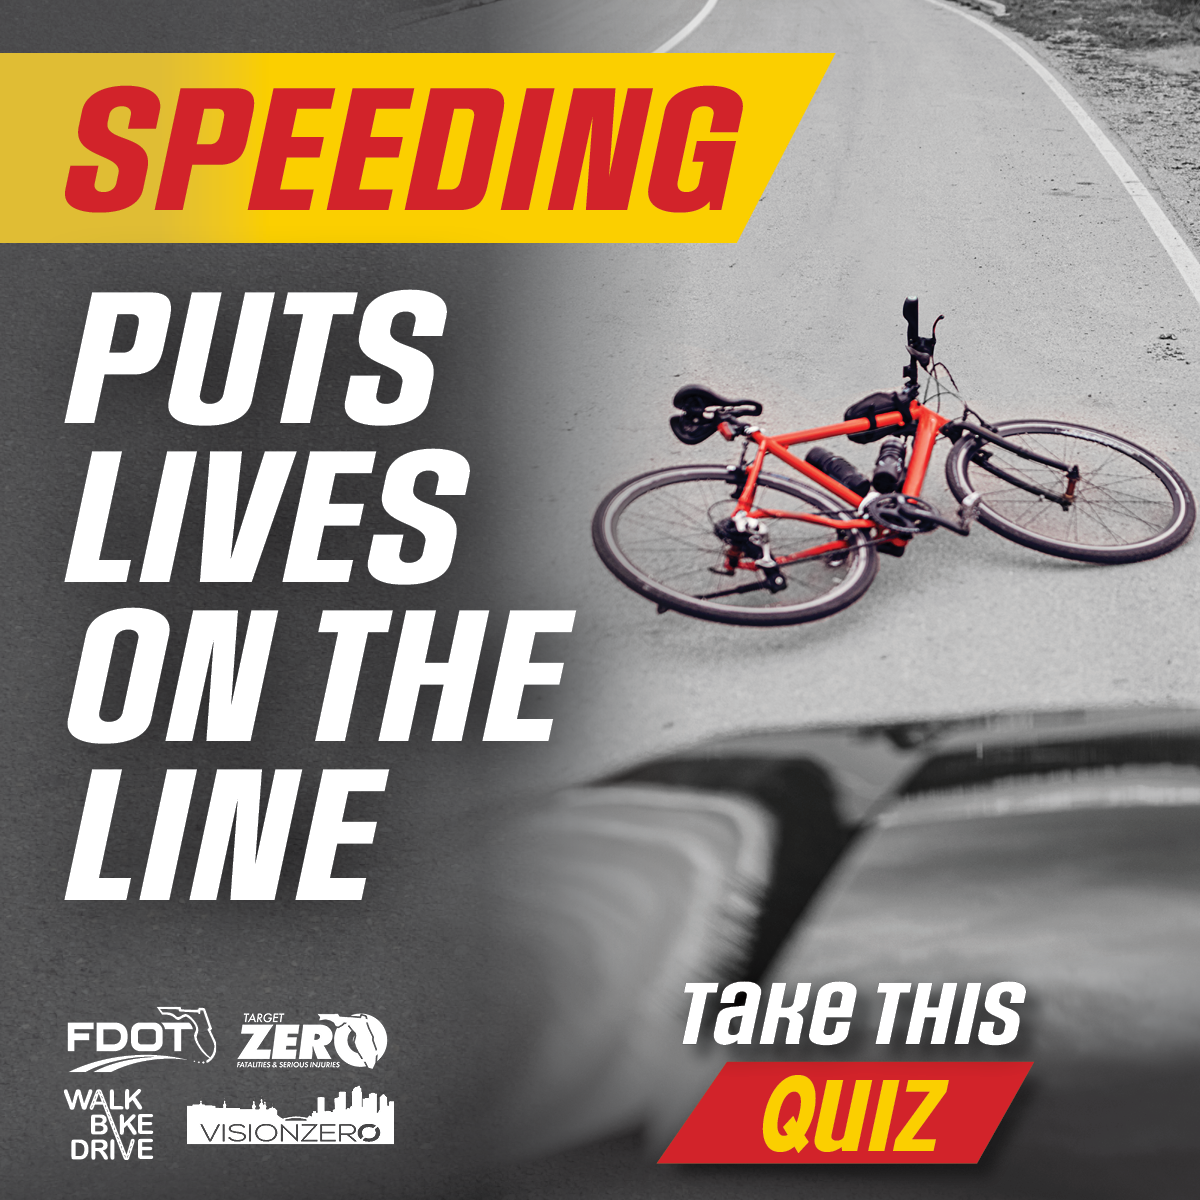 Create safer roads for pedestrians and cyclists by using this quiz to test your knowledge.